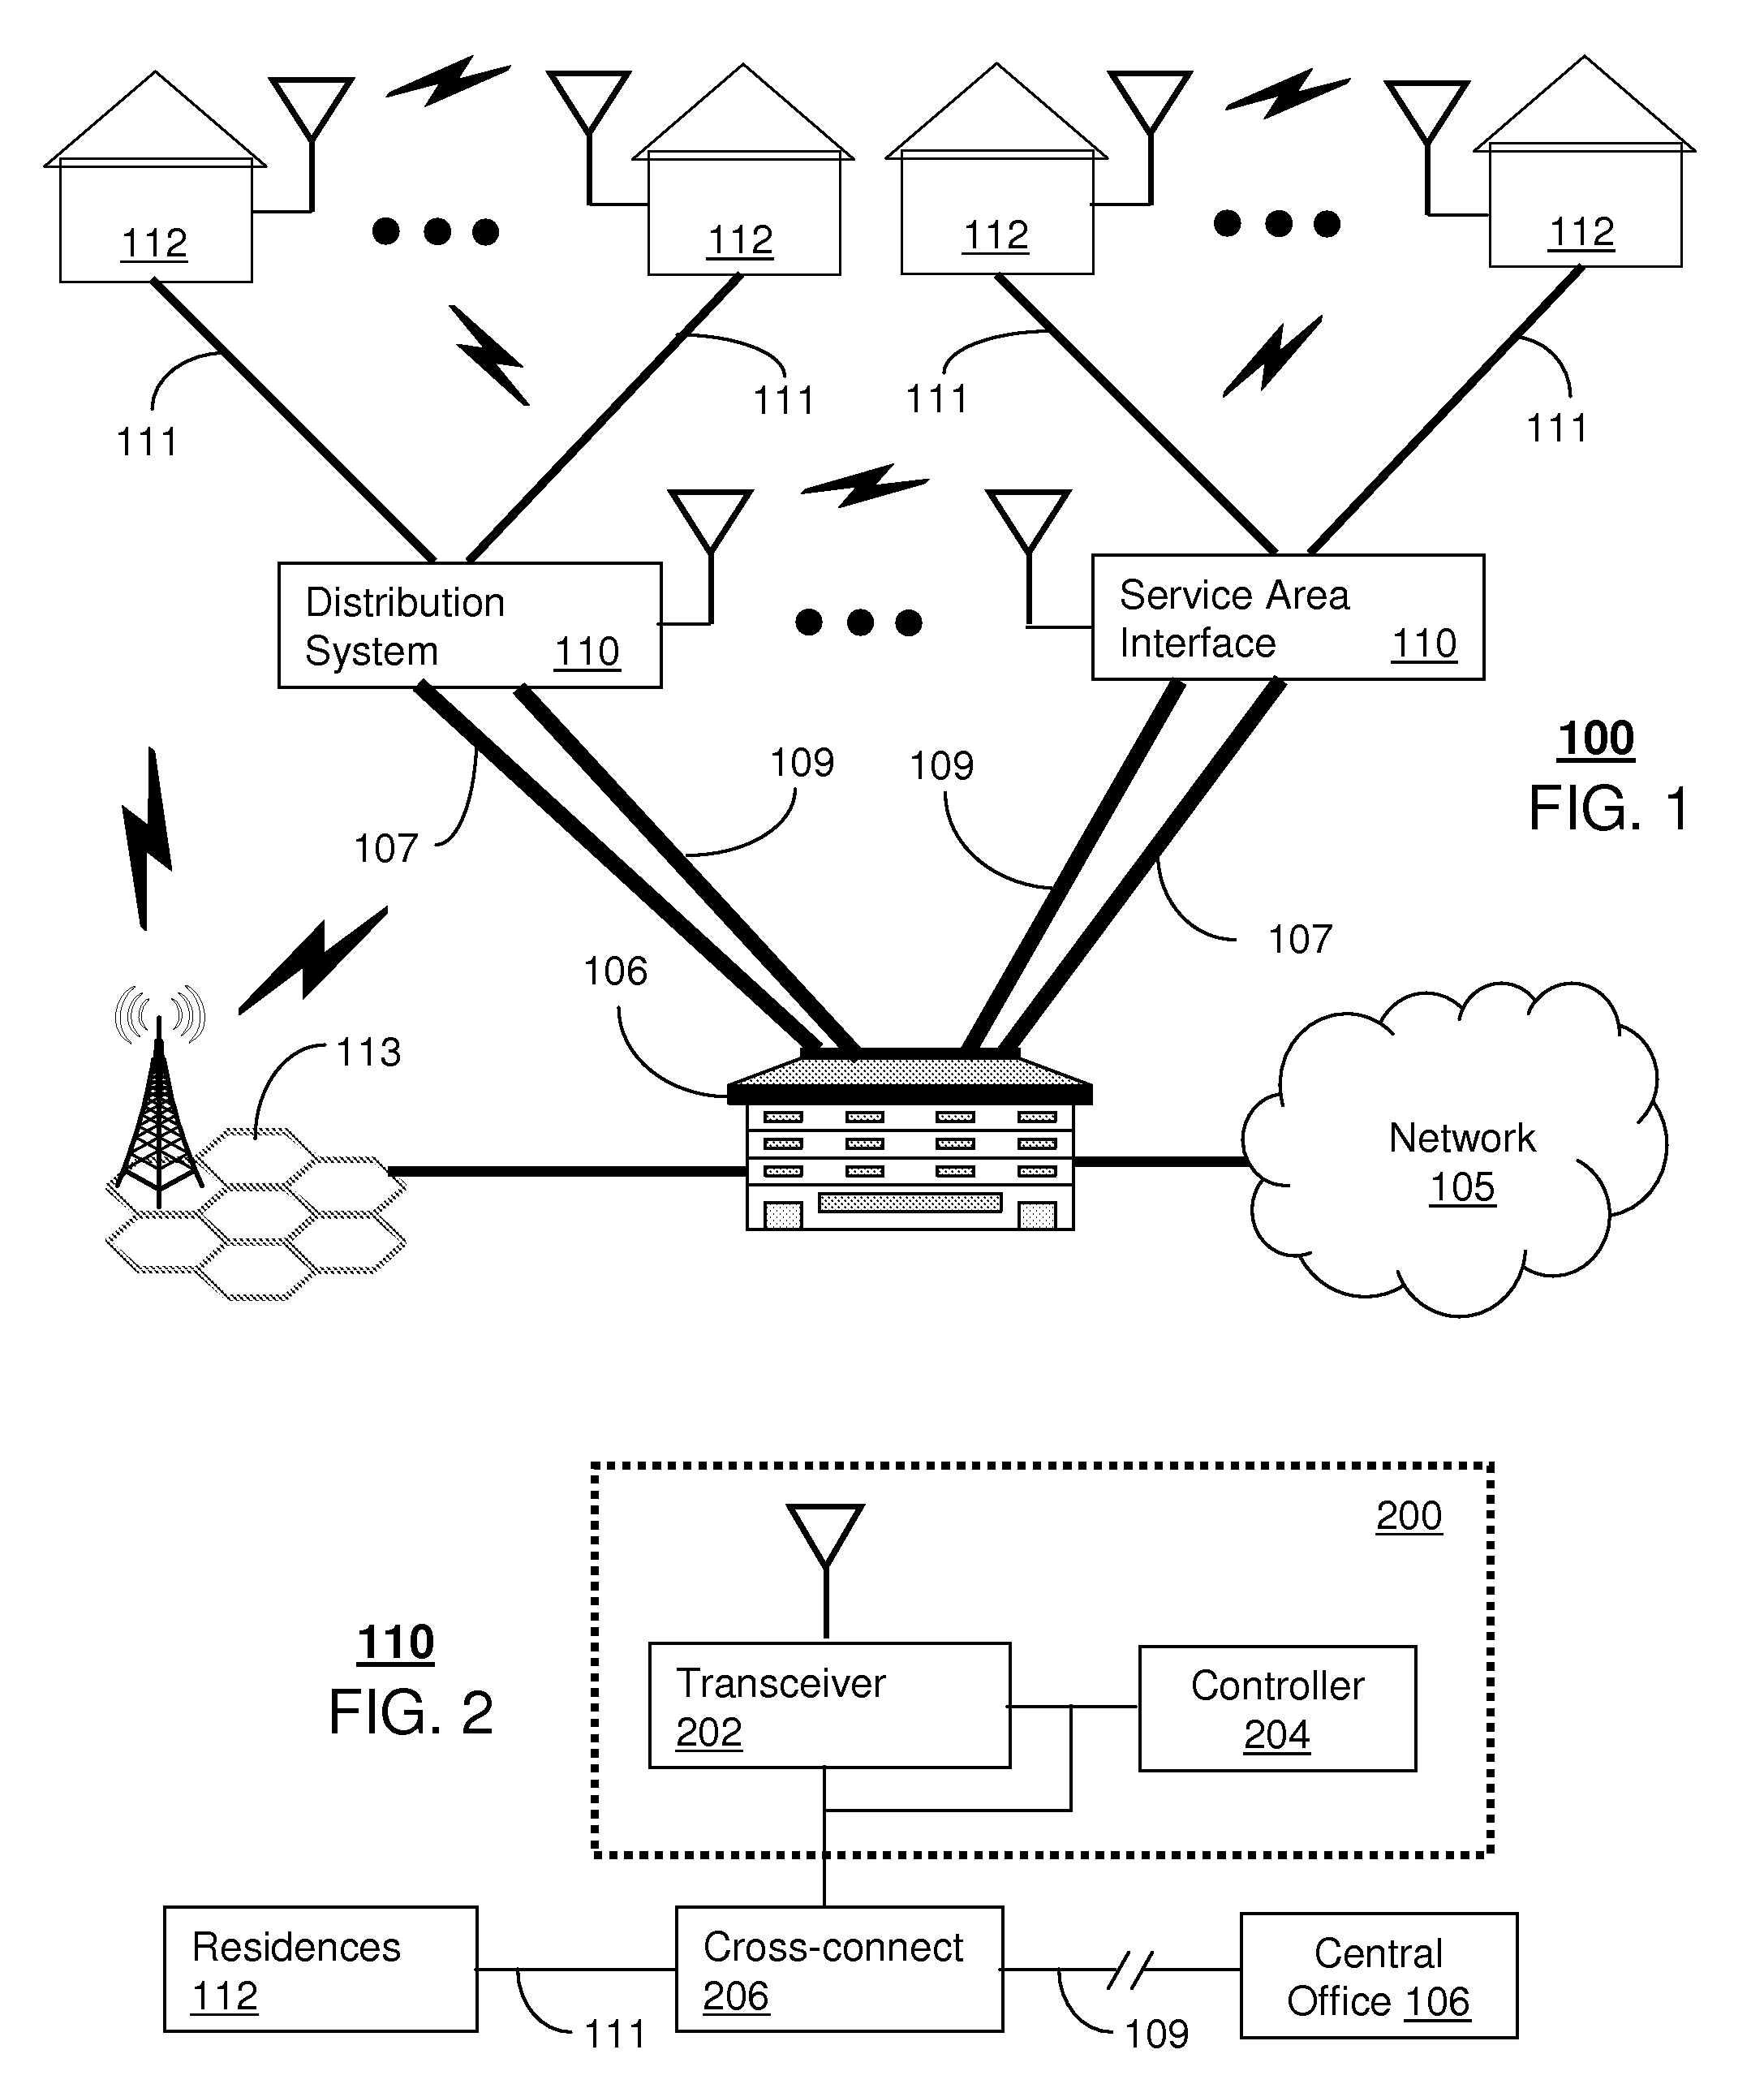 Method and apparatus for configuring a network topology with alternative communication paths